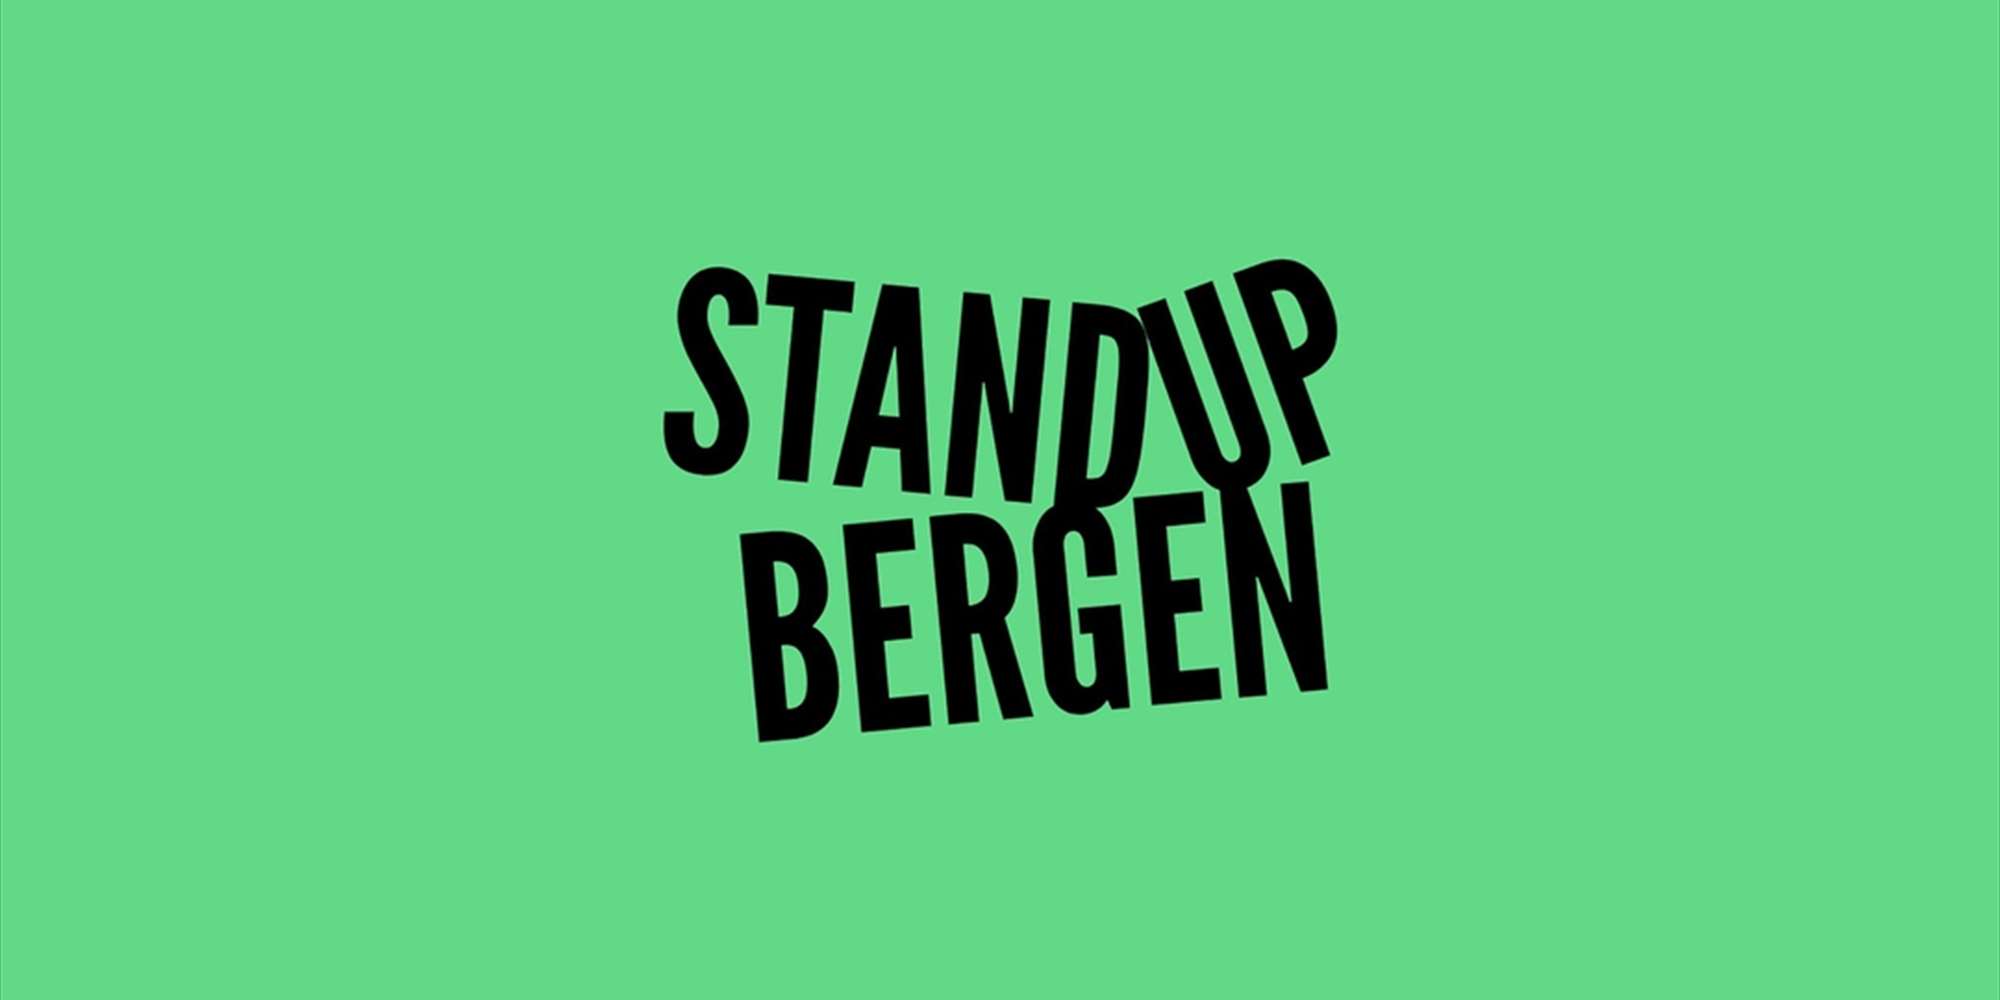 Up And Coming med Stand Up Bergen